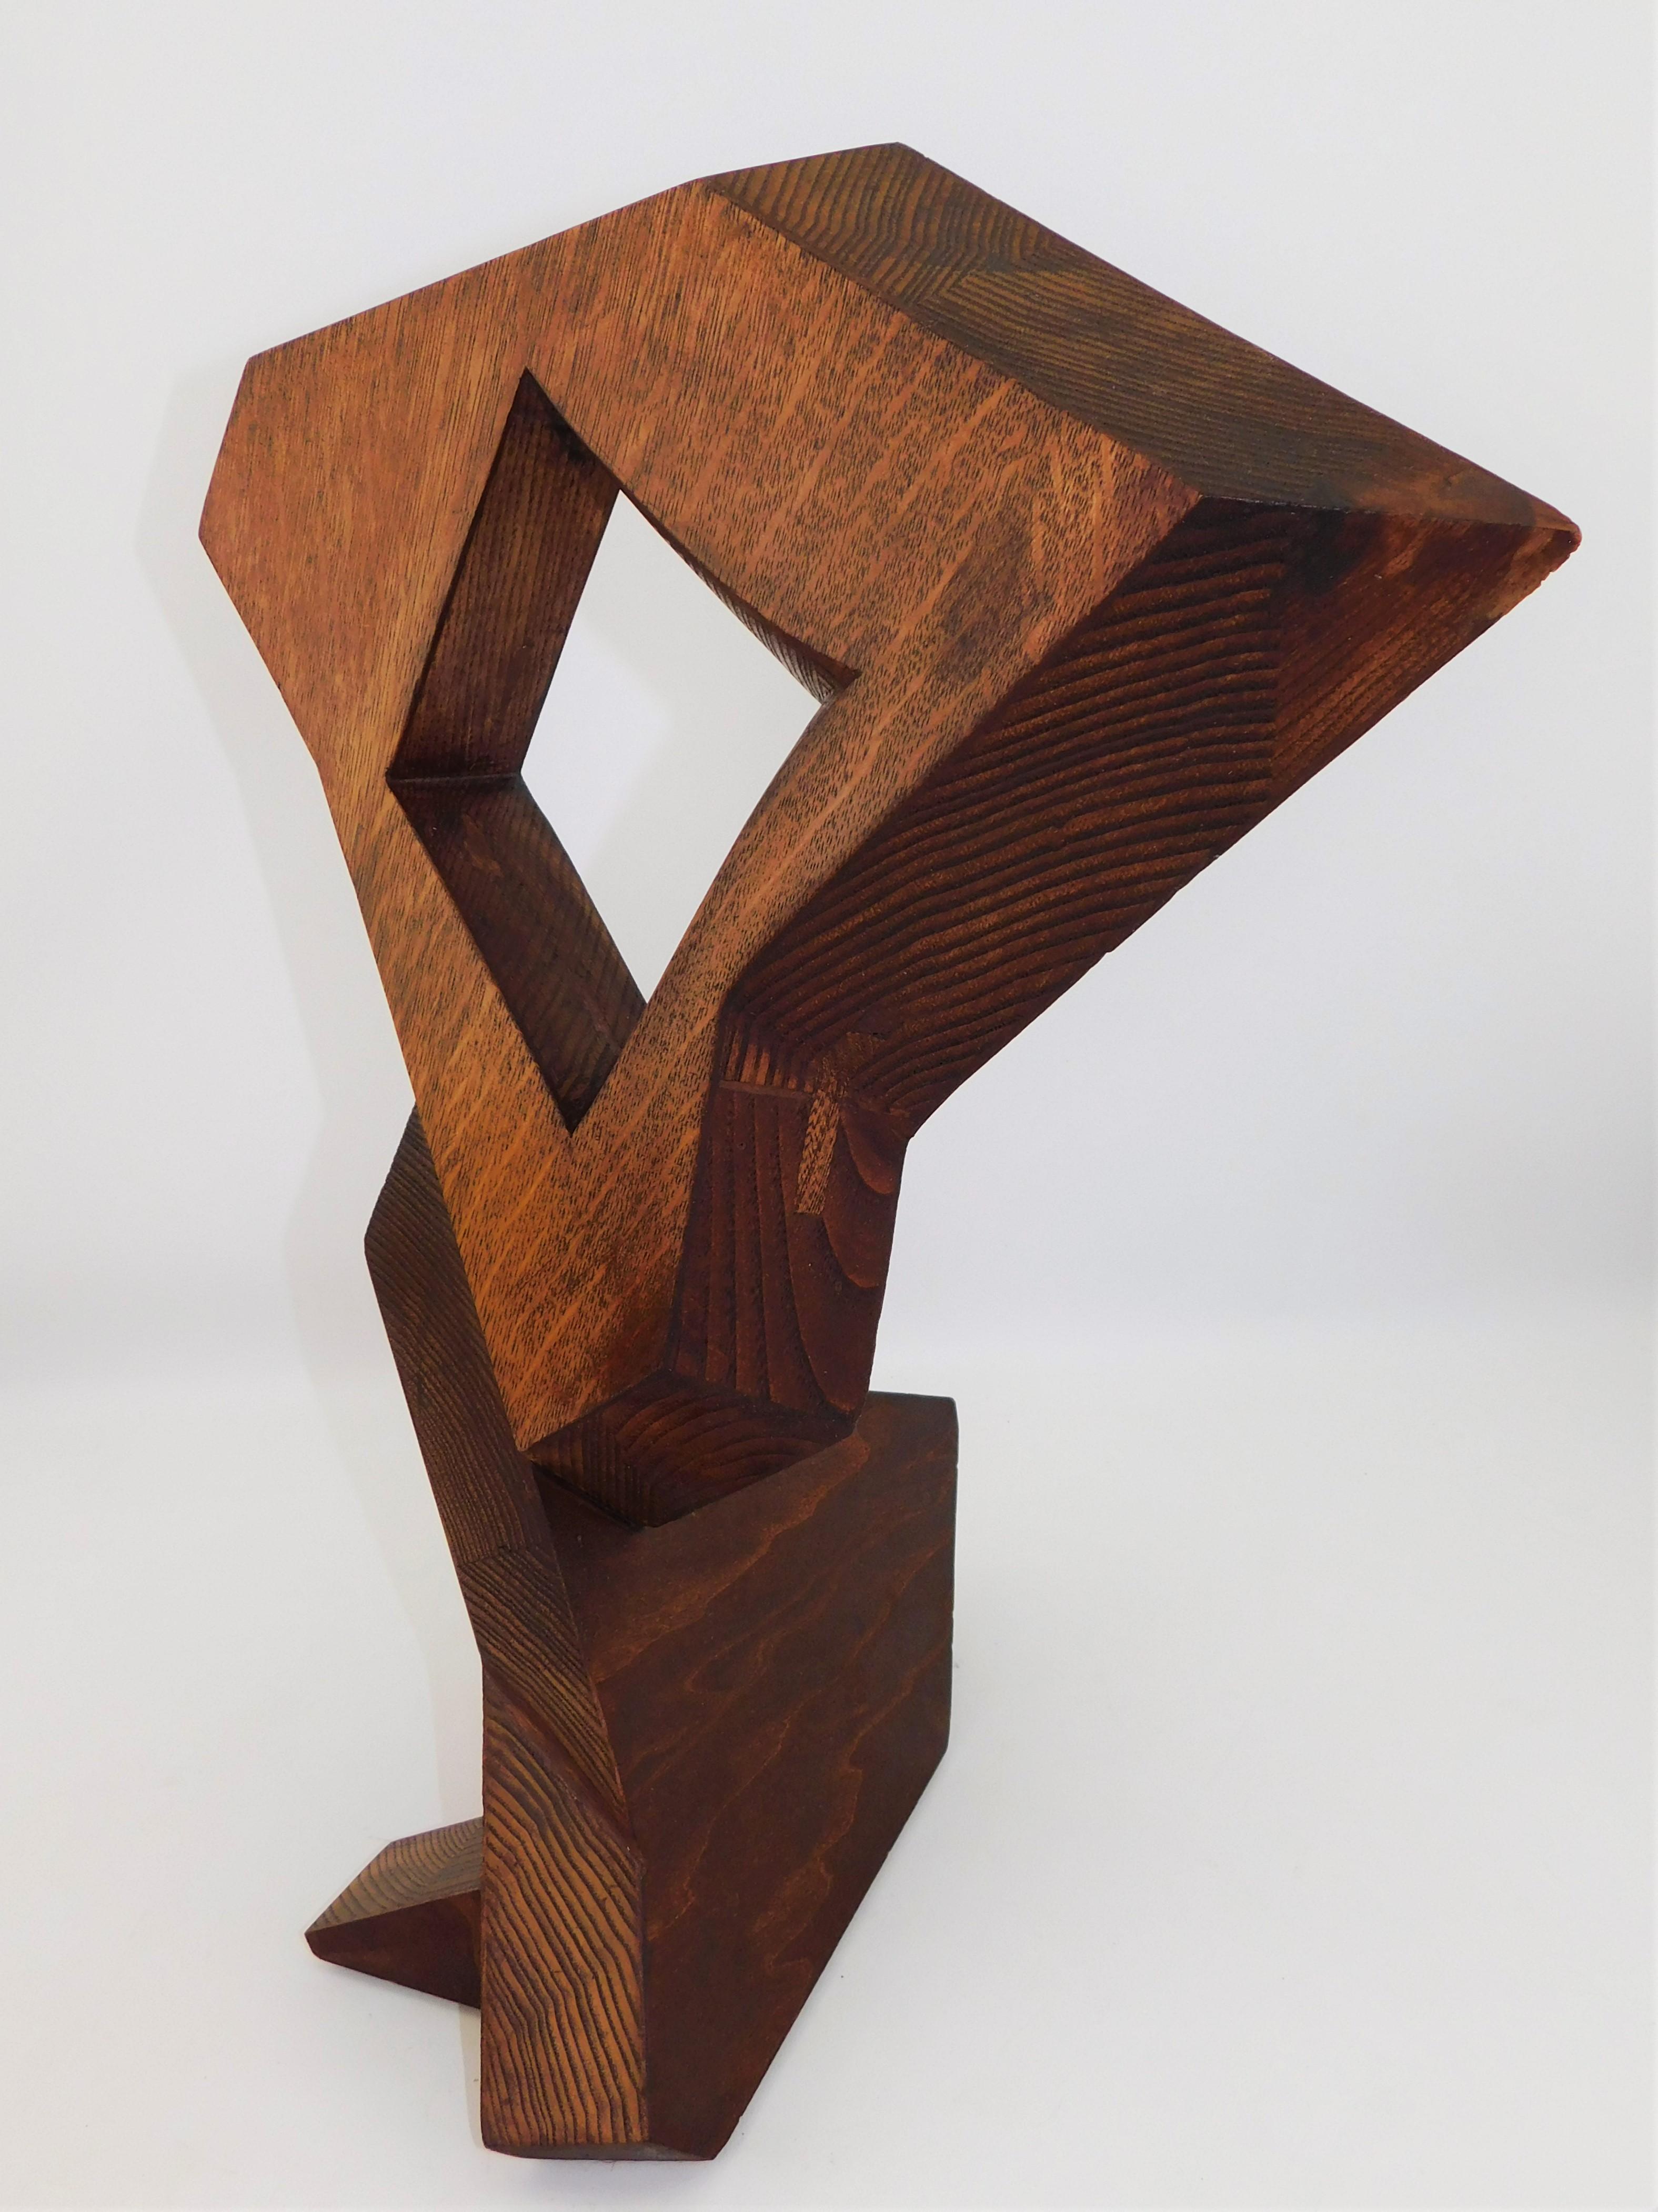 Signed Modern Abstract Constructivist Styled Wooden Oak Sculpture Czeslaw Budny In Good Condition For Sale In Hamilton, Ontario